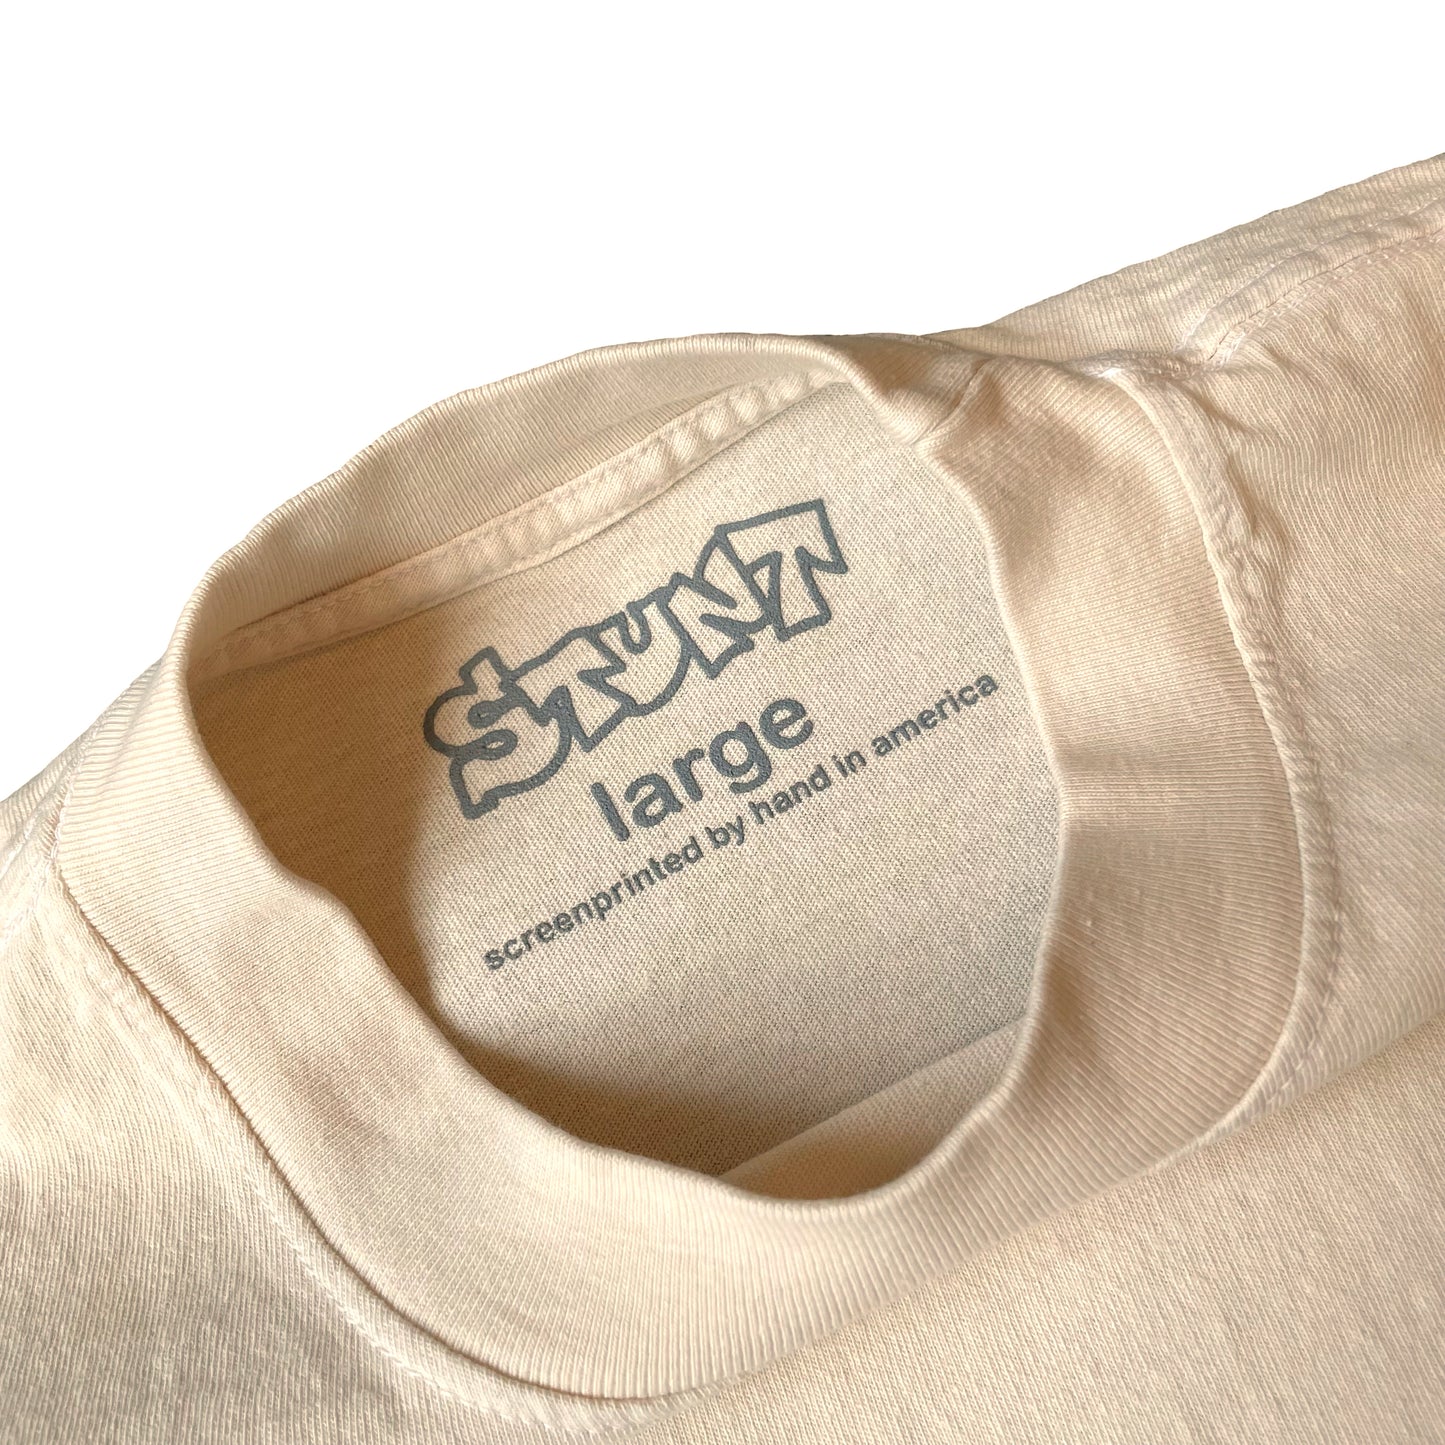 OLYMPIA SKATESHOP SMILEY SCRIPT TEE CREME/OLY RED